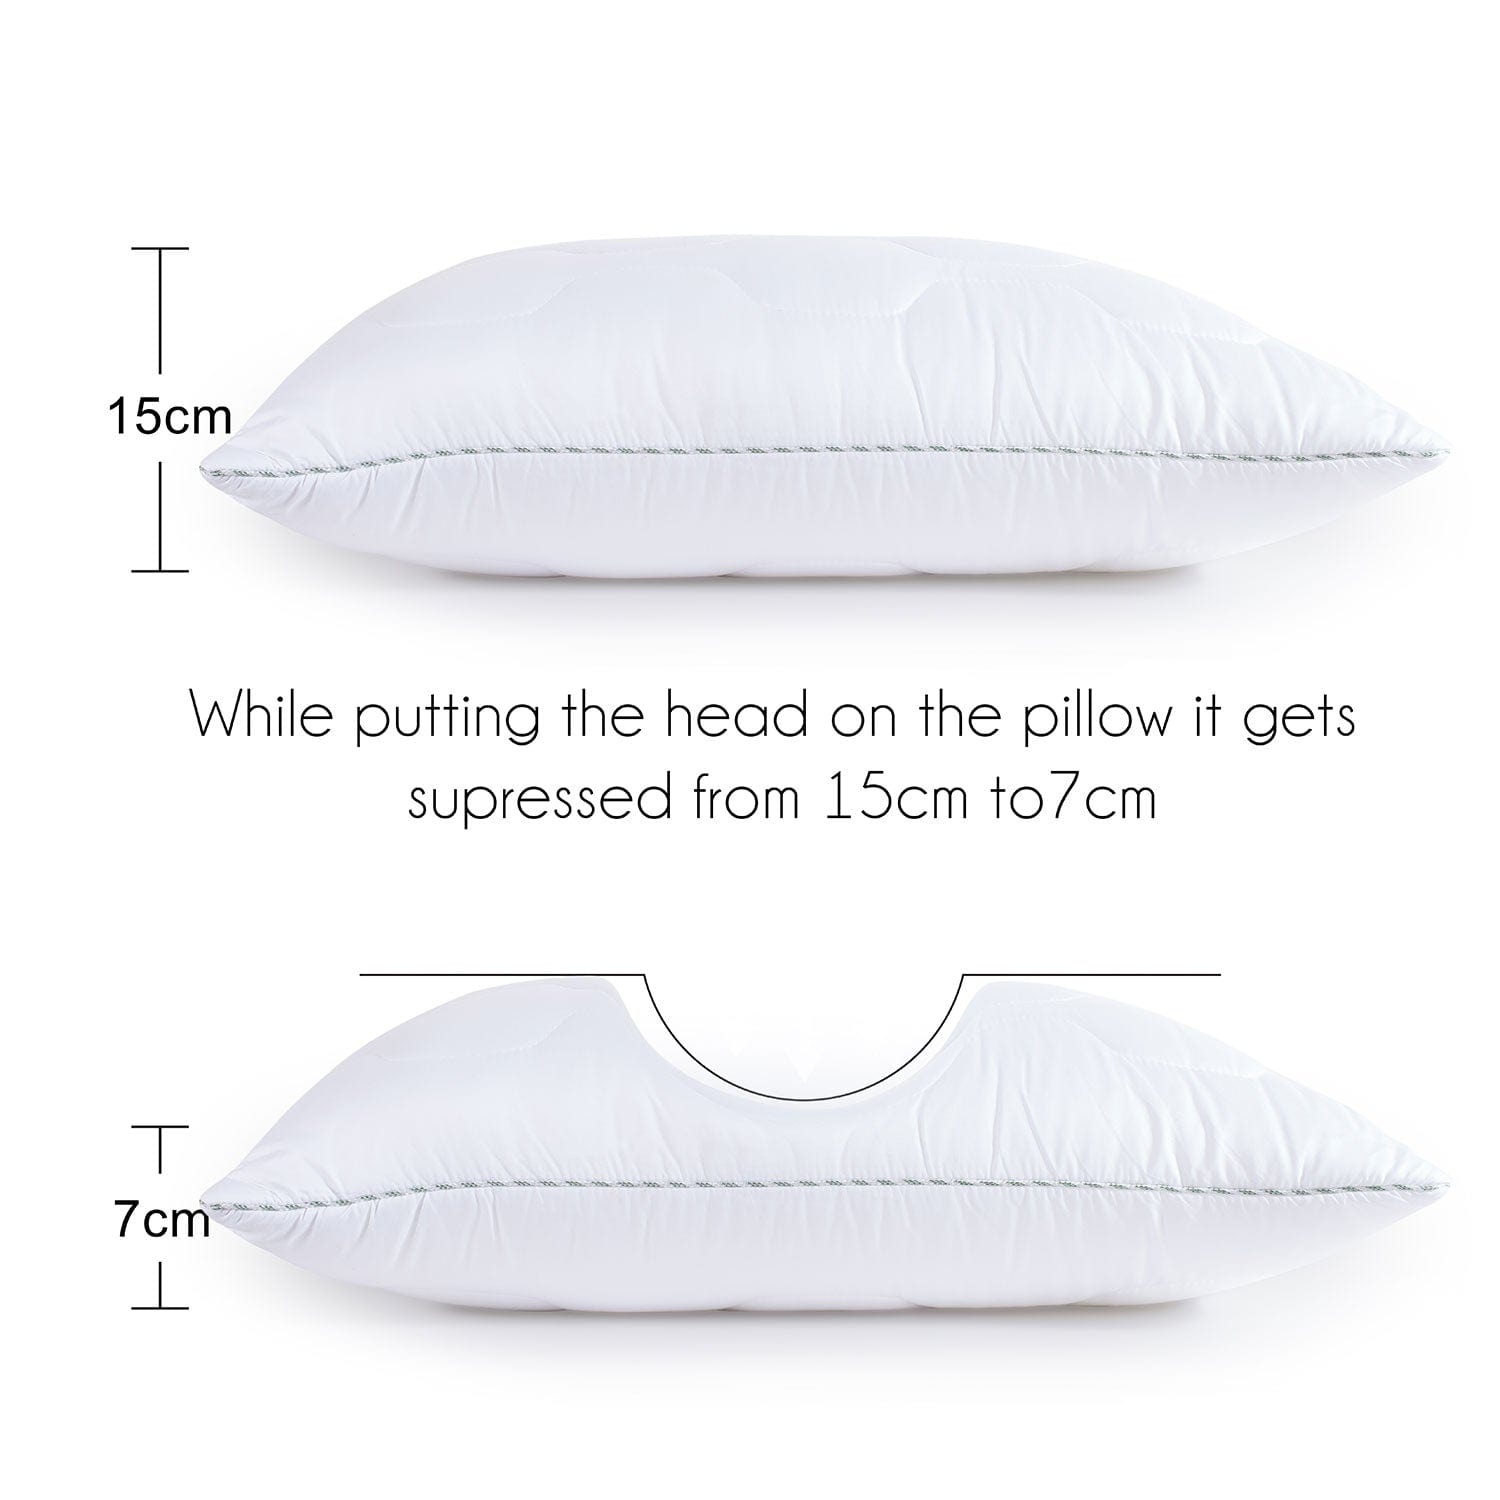 Tencel™ Pillow extract from wood pulp